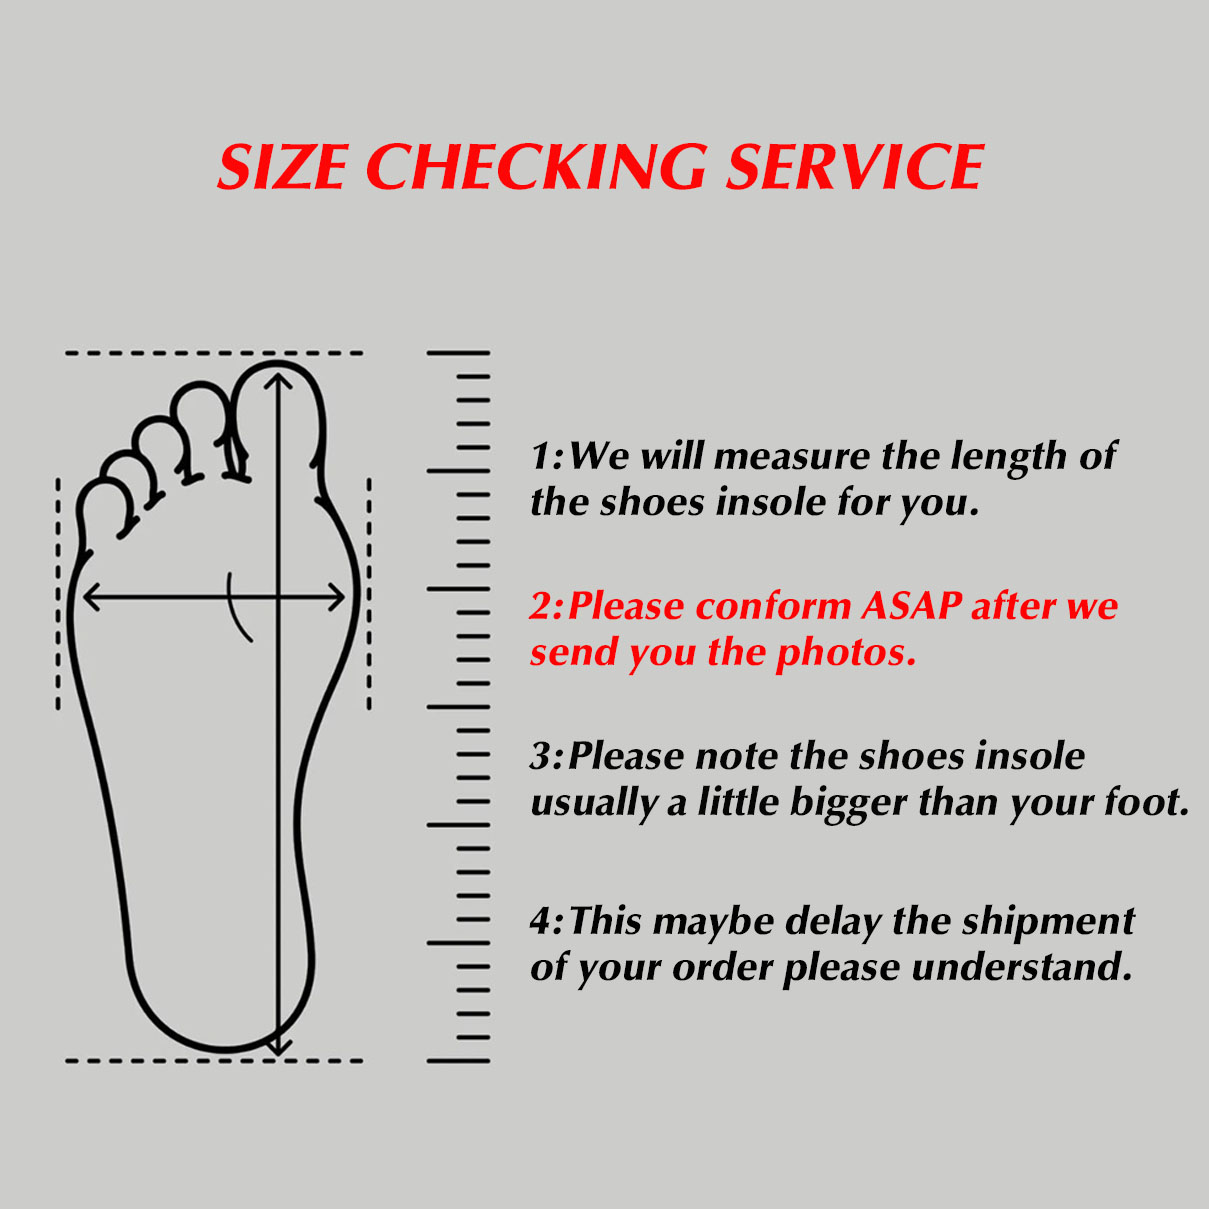 SIZE CHECKING